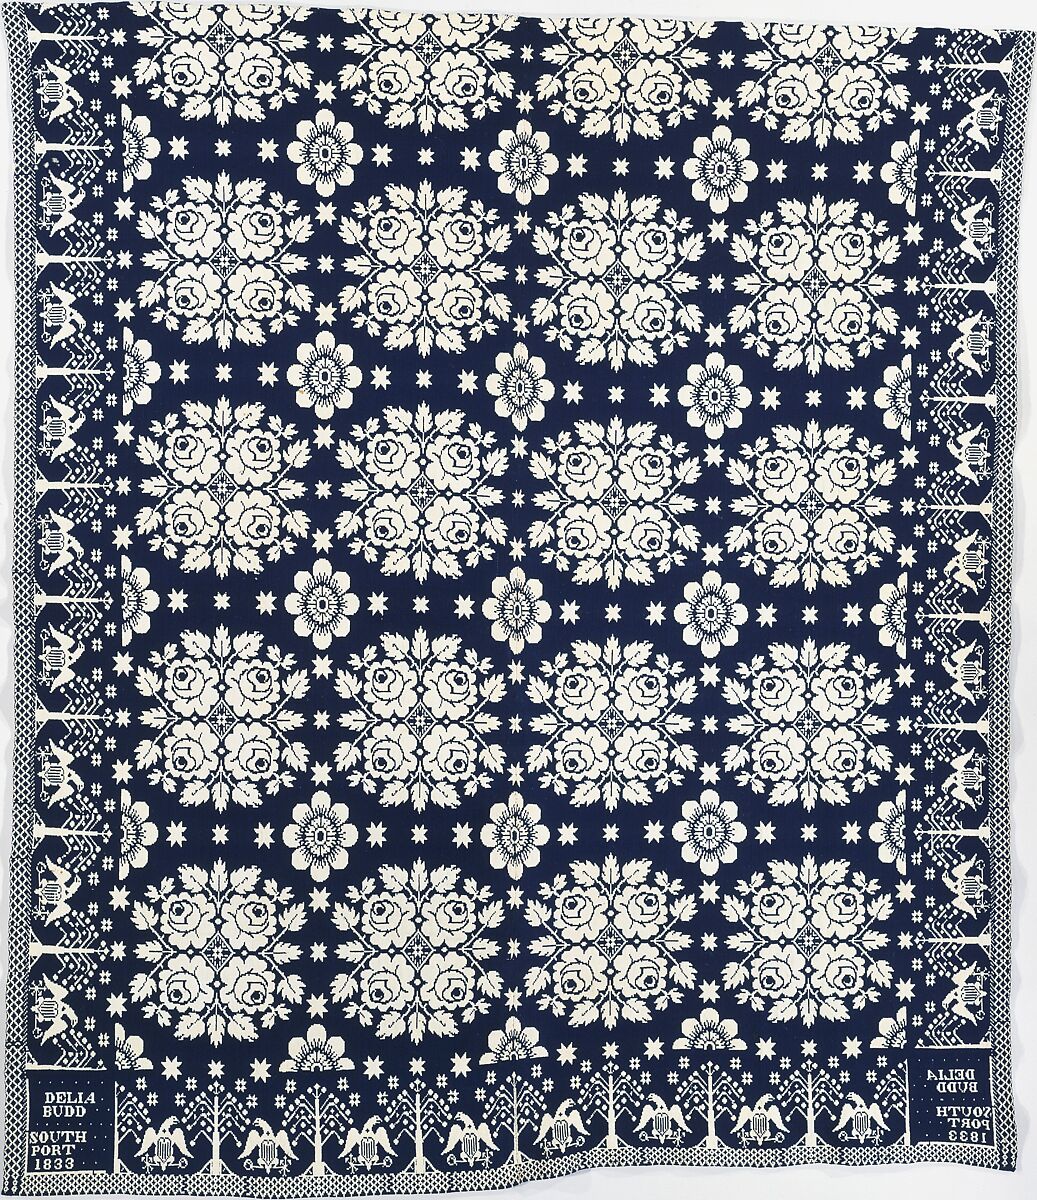 Coverlet, Cotton and wool warp and weft, woven, American 